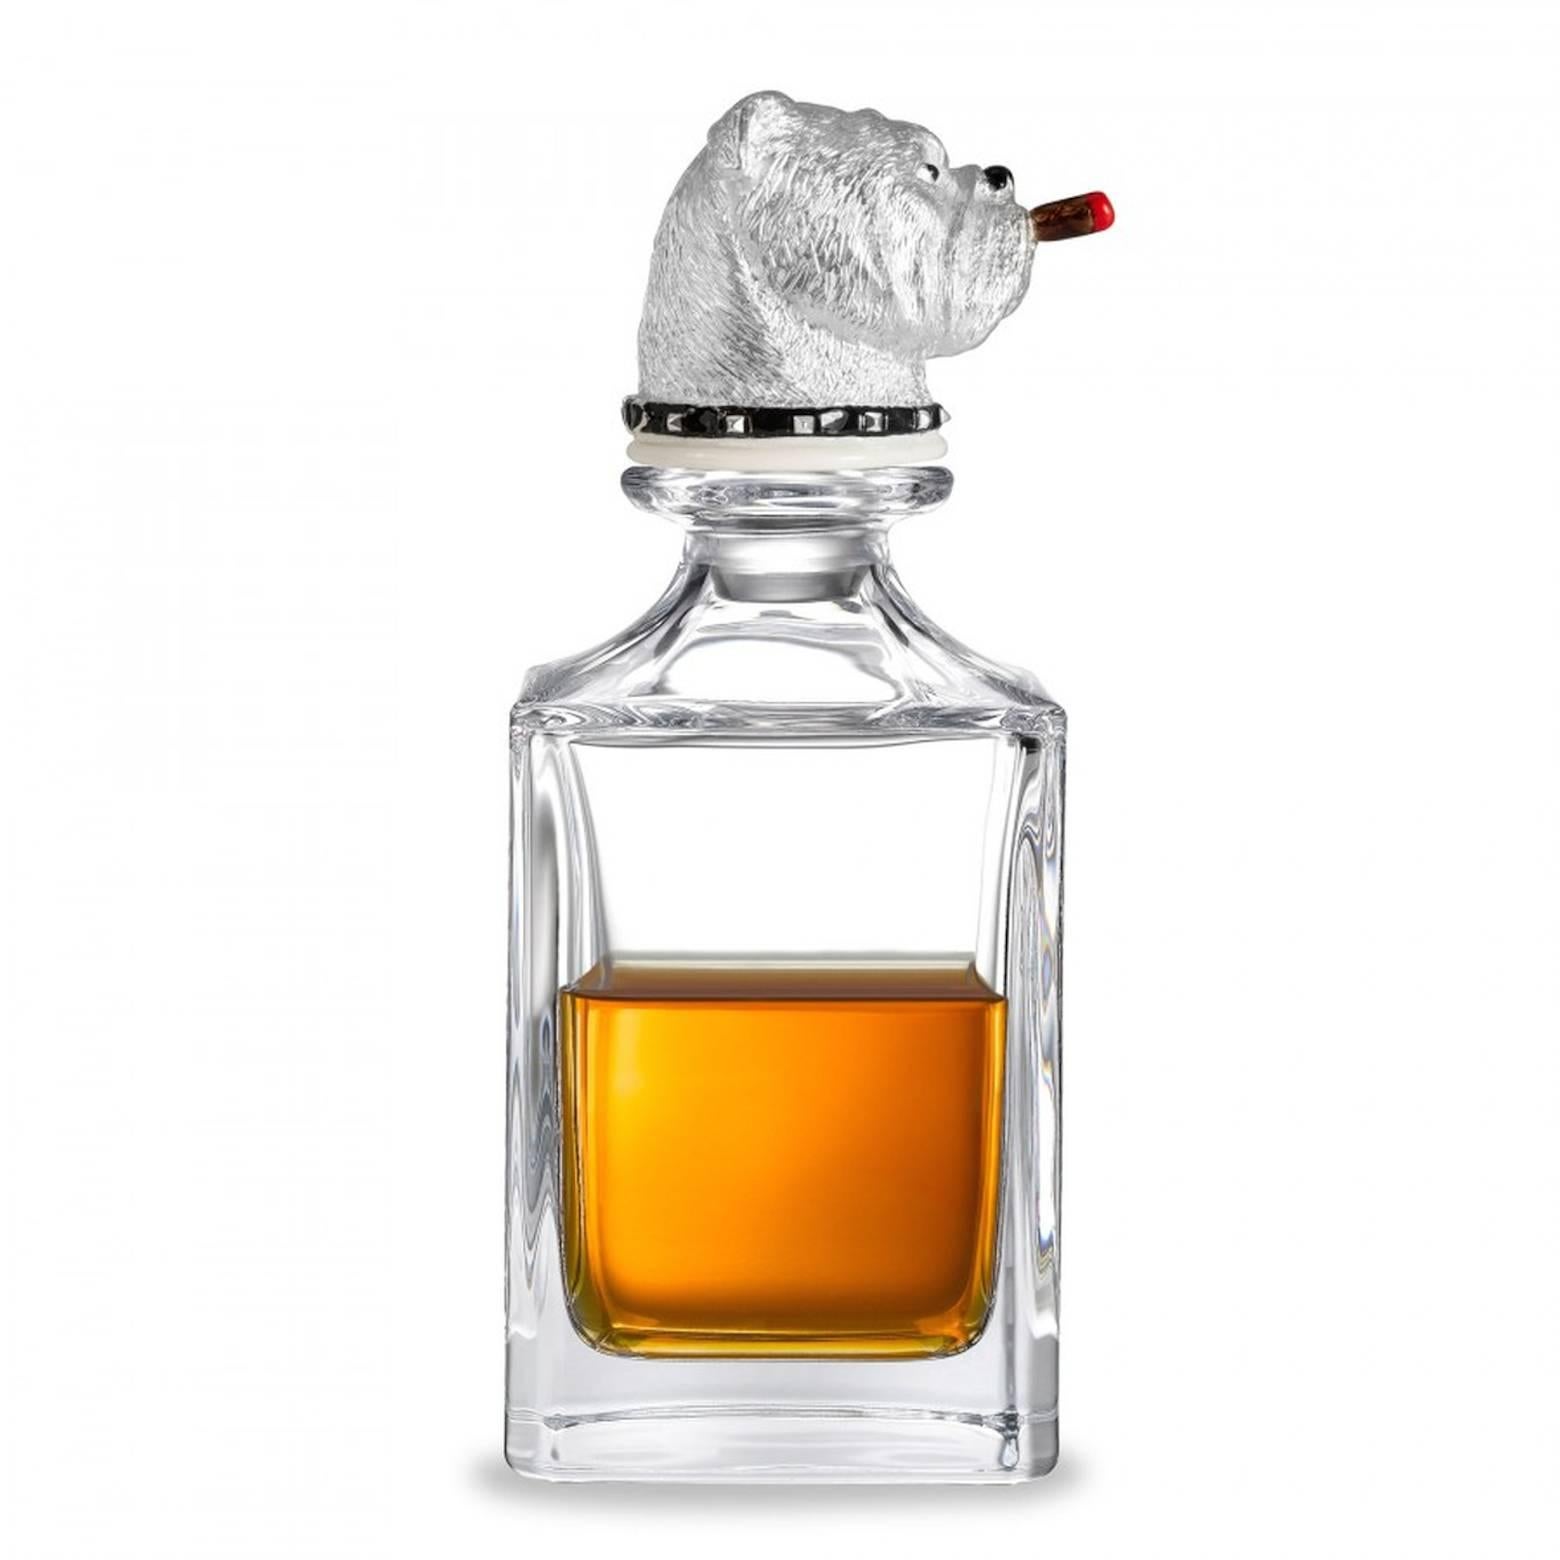 
PLEASE NOTE: OUR PRICE IS FULLY INCLUSIVE OF SHIPPING, IMPORTATION TAXES & DUTIES.

Our beautiful decanters feature a crystal glass decanter base, handmade by craftsman in Dartington's Devon based workshops.

This decanter is finished with a